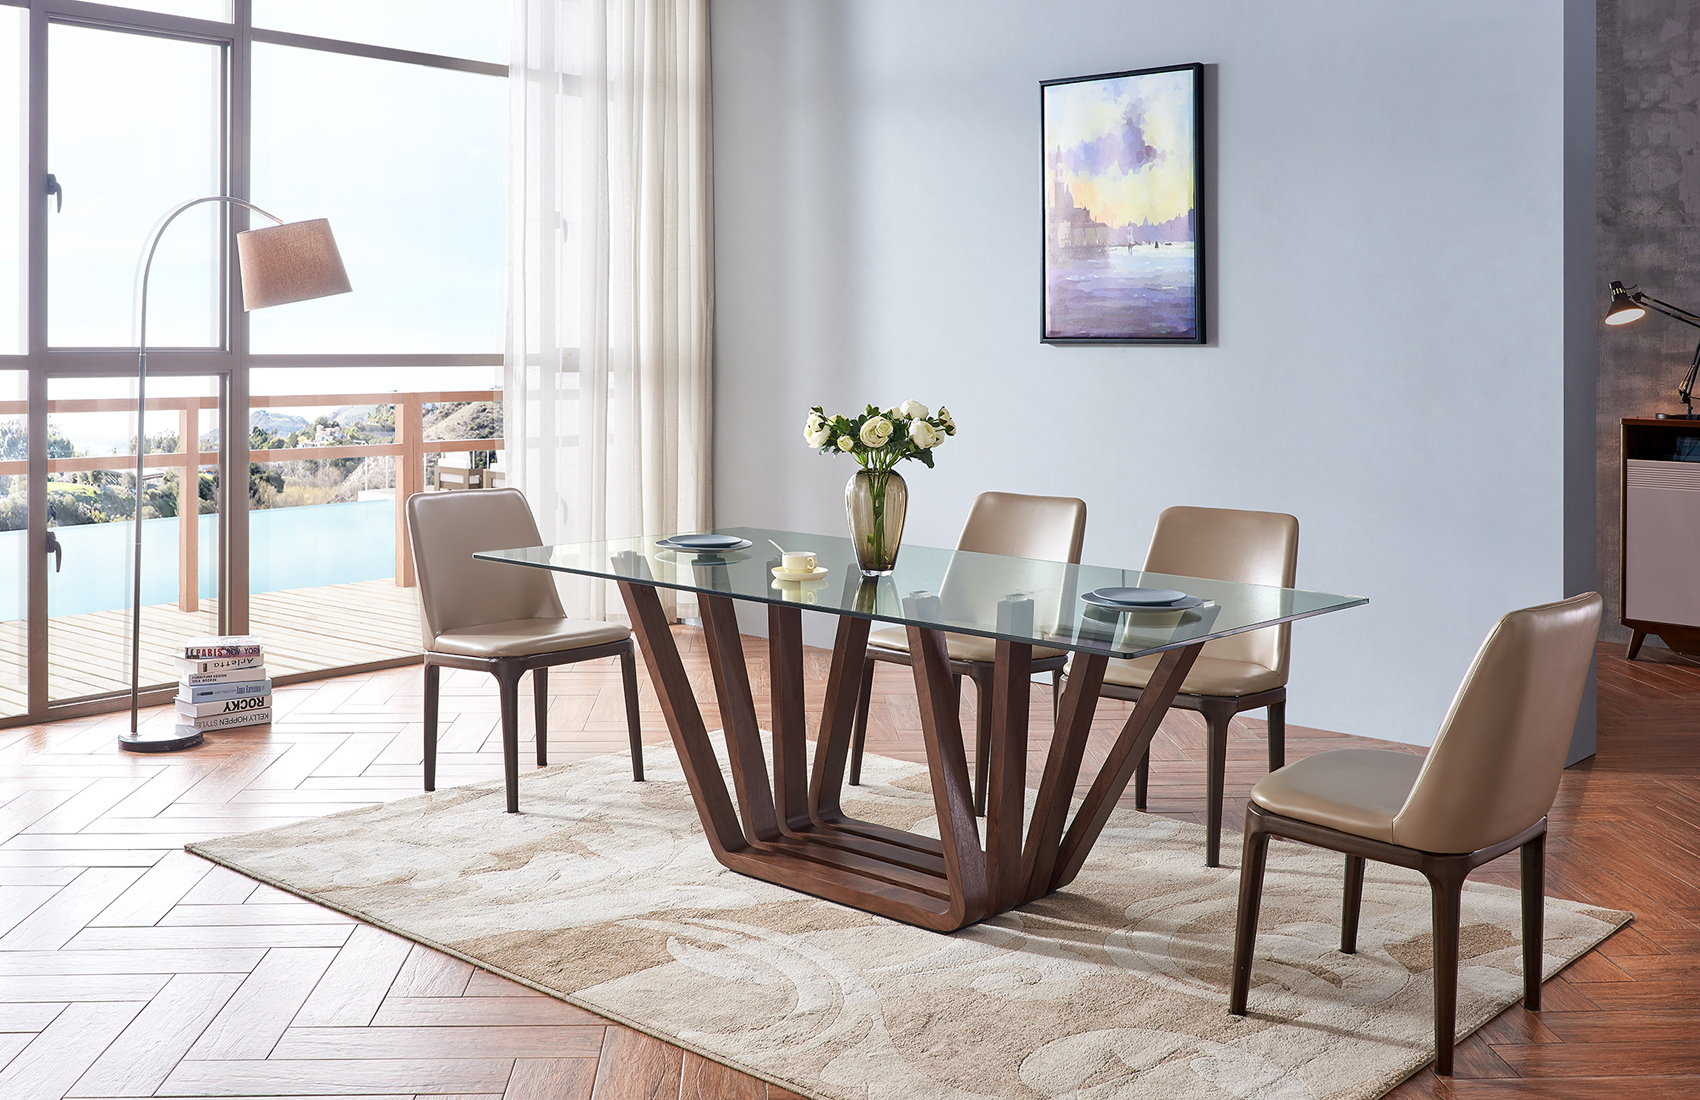 contemporary dining room sets